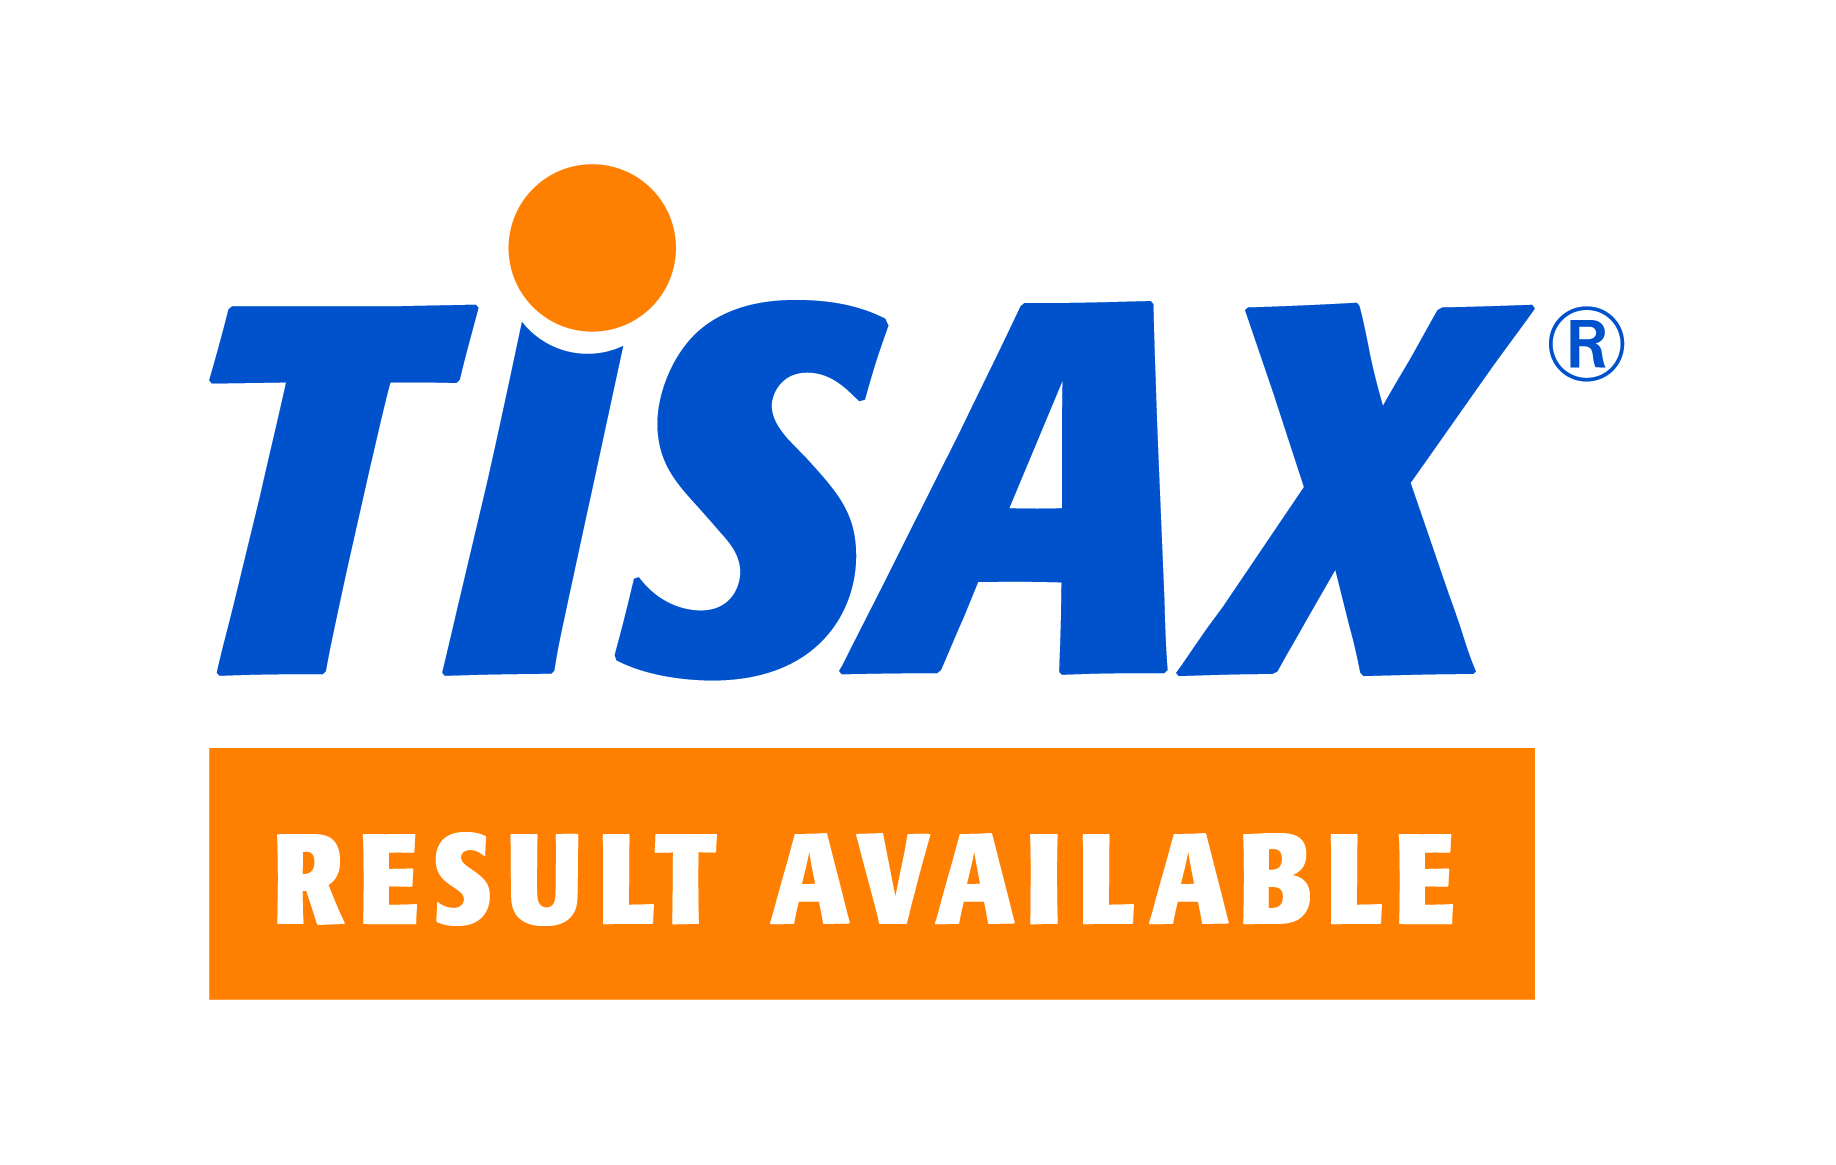 TISAX Result Available